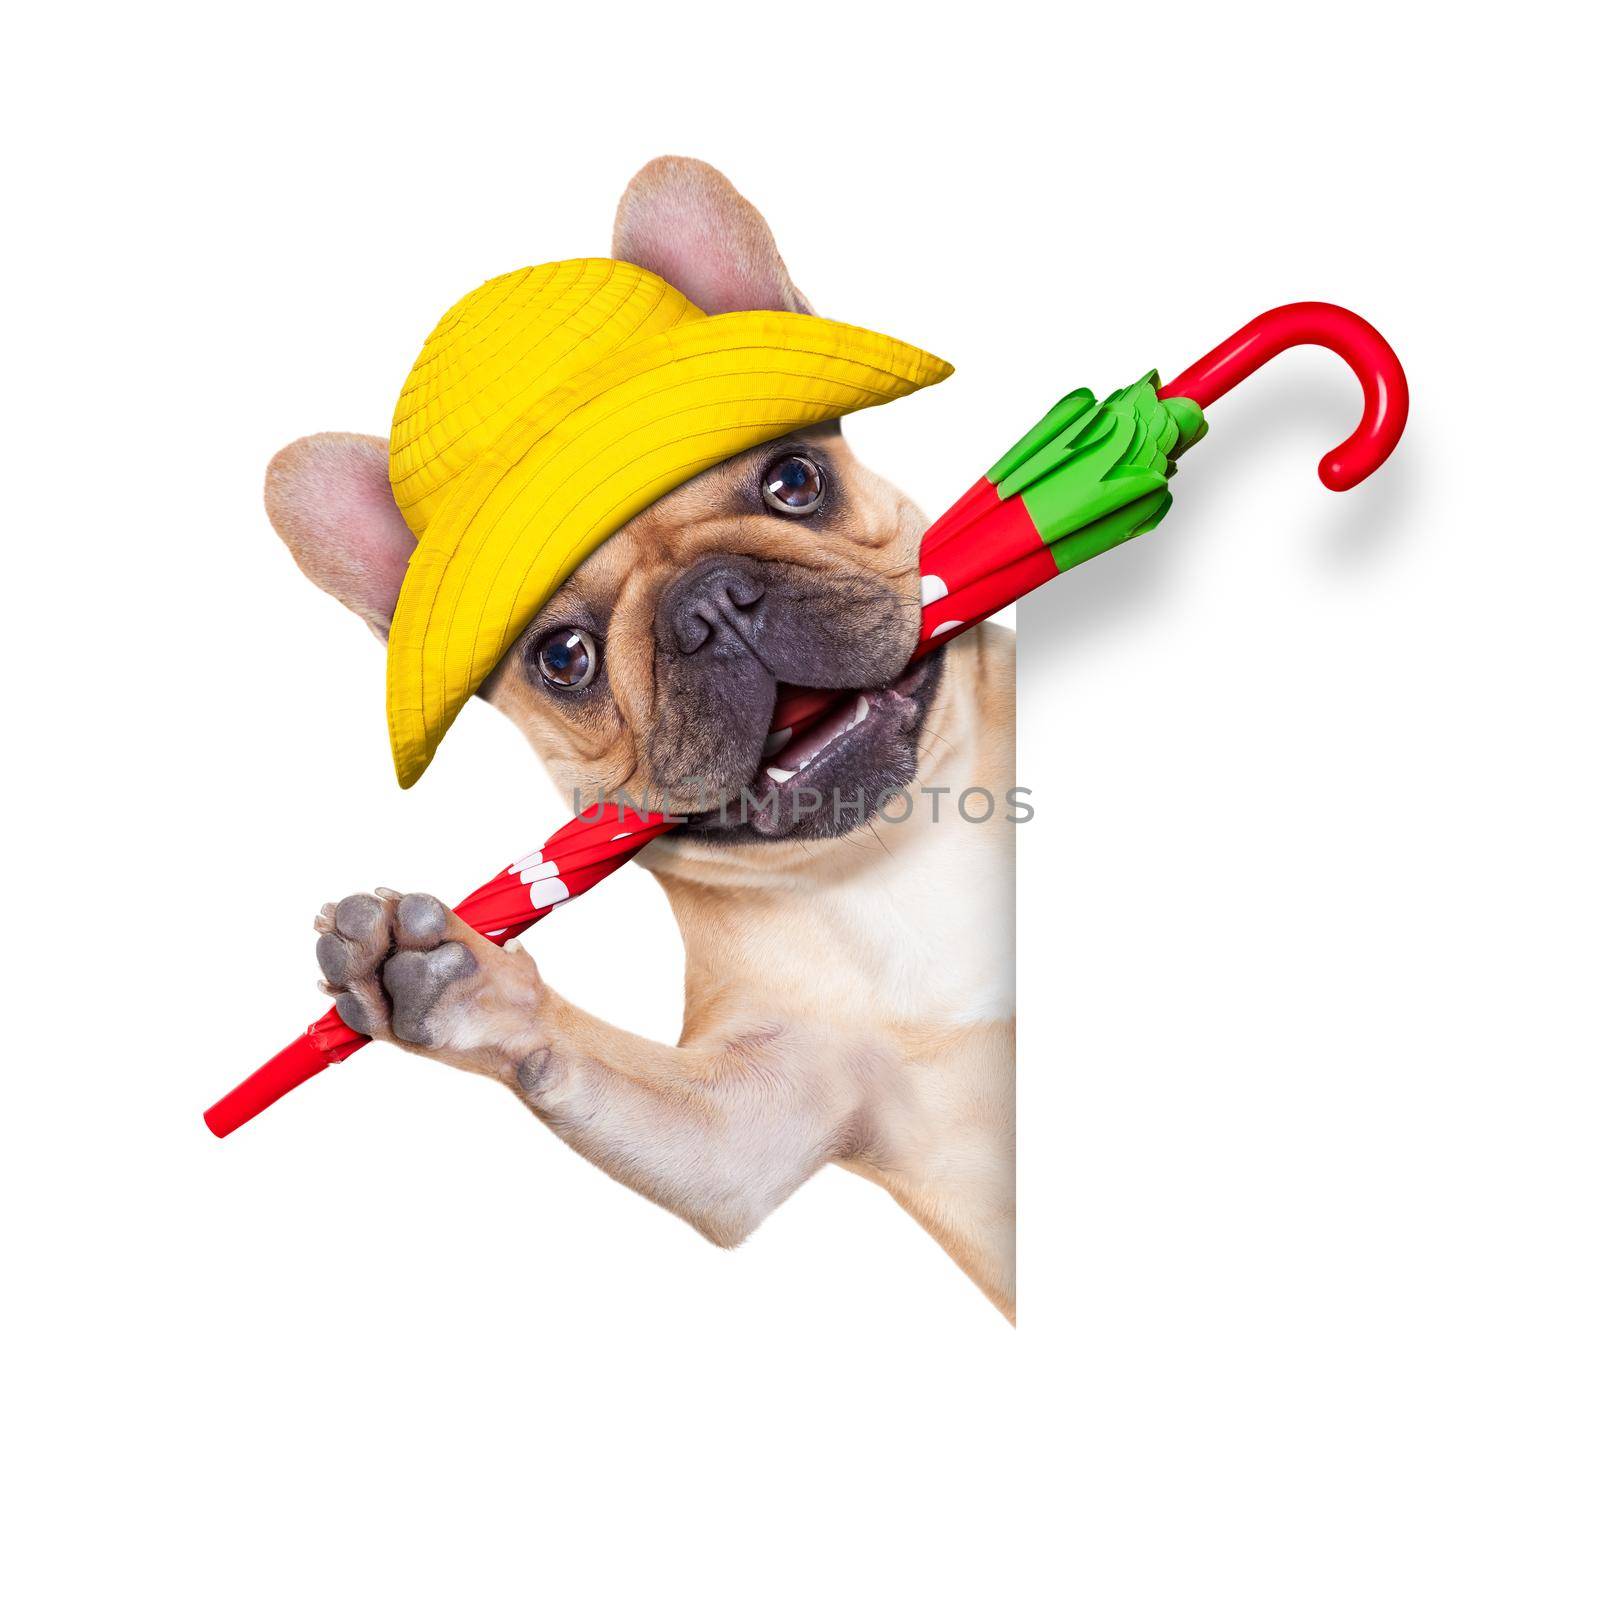 fawn french bulldog sitting and waiting to go for a walk with owner , prepared for rain and dirt,wearing rain boots , holding umbrella with mouth,  isolated on white background